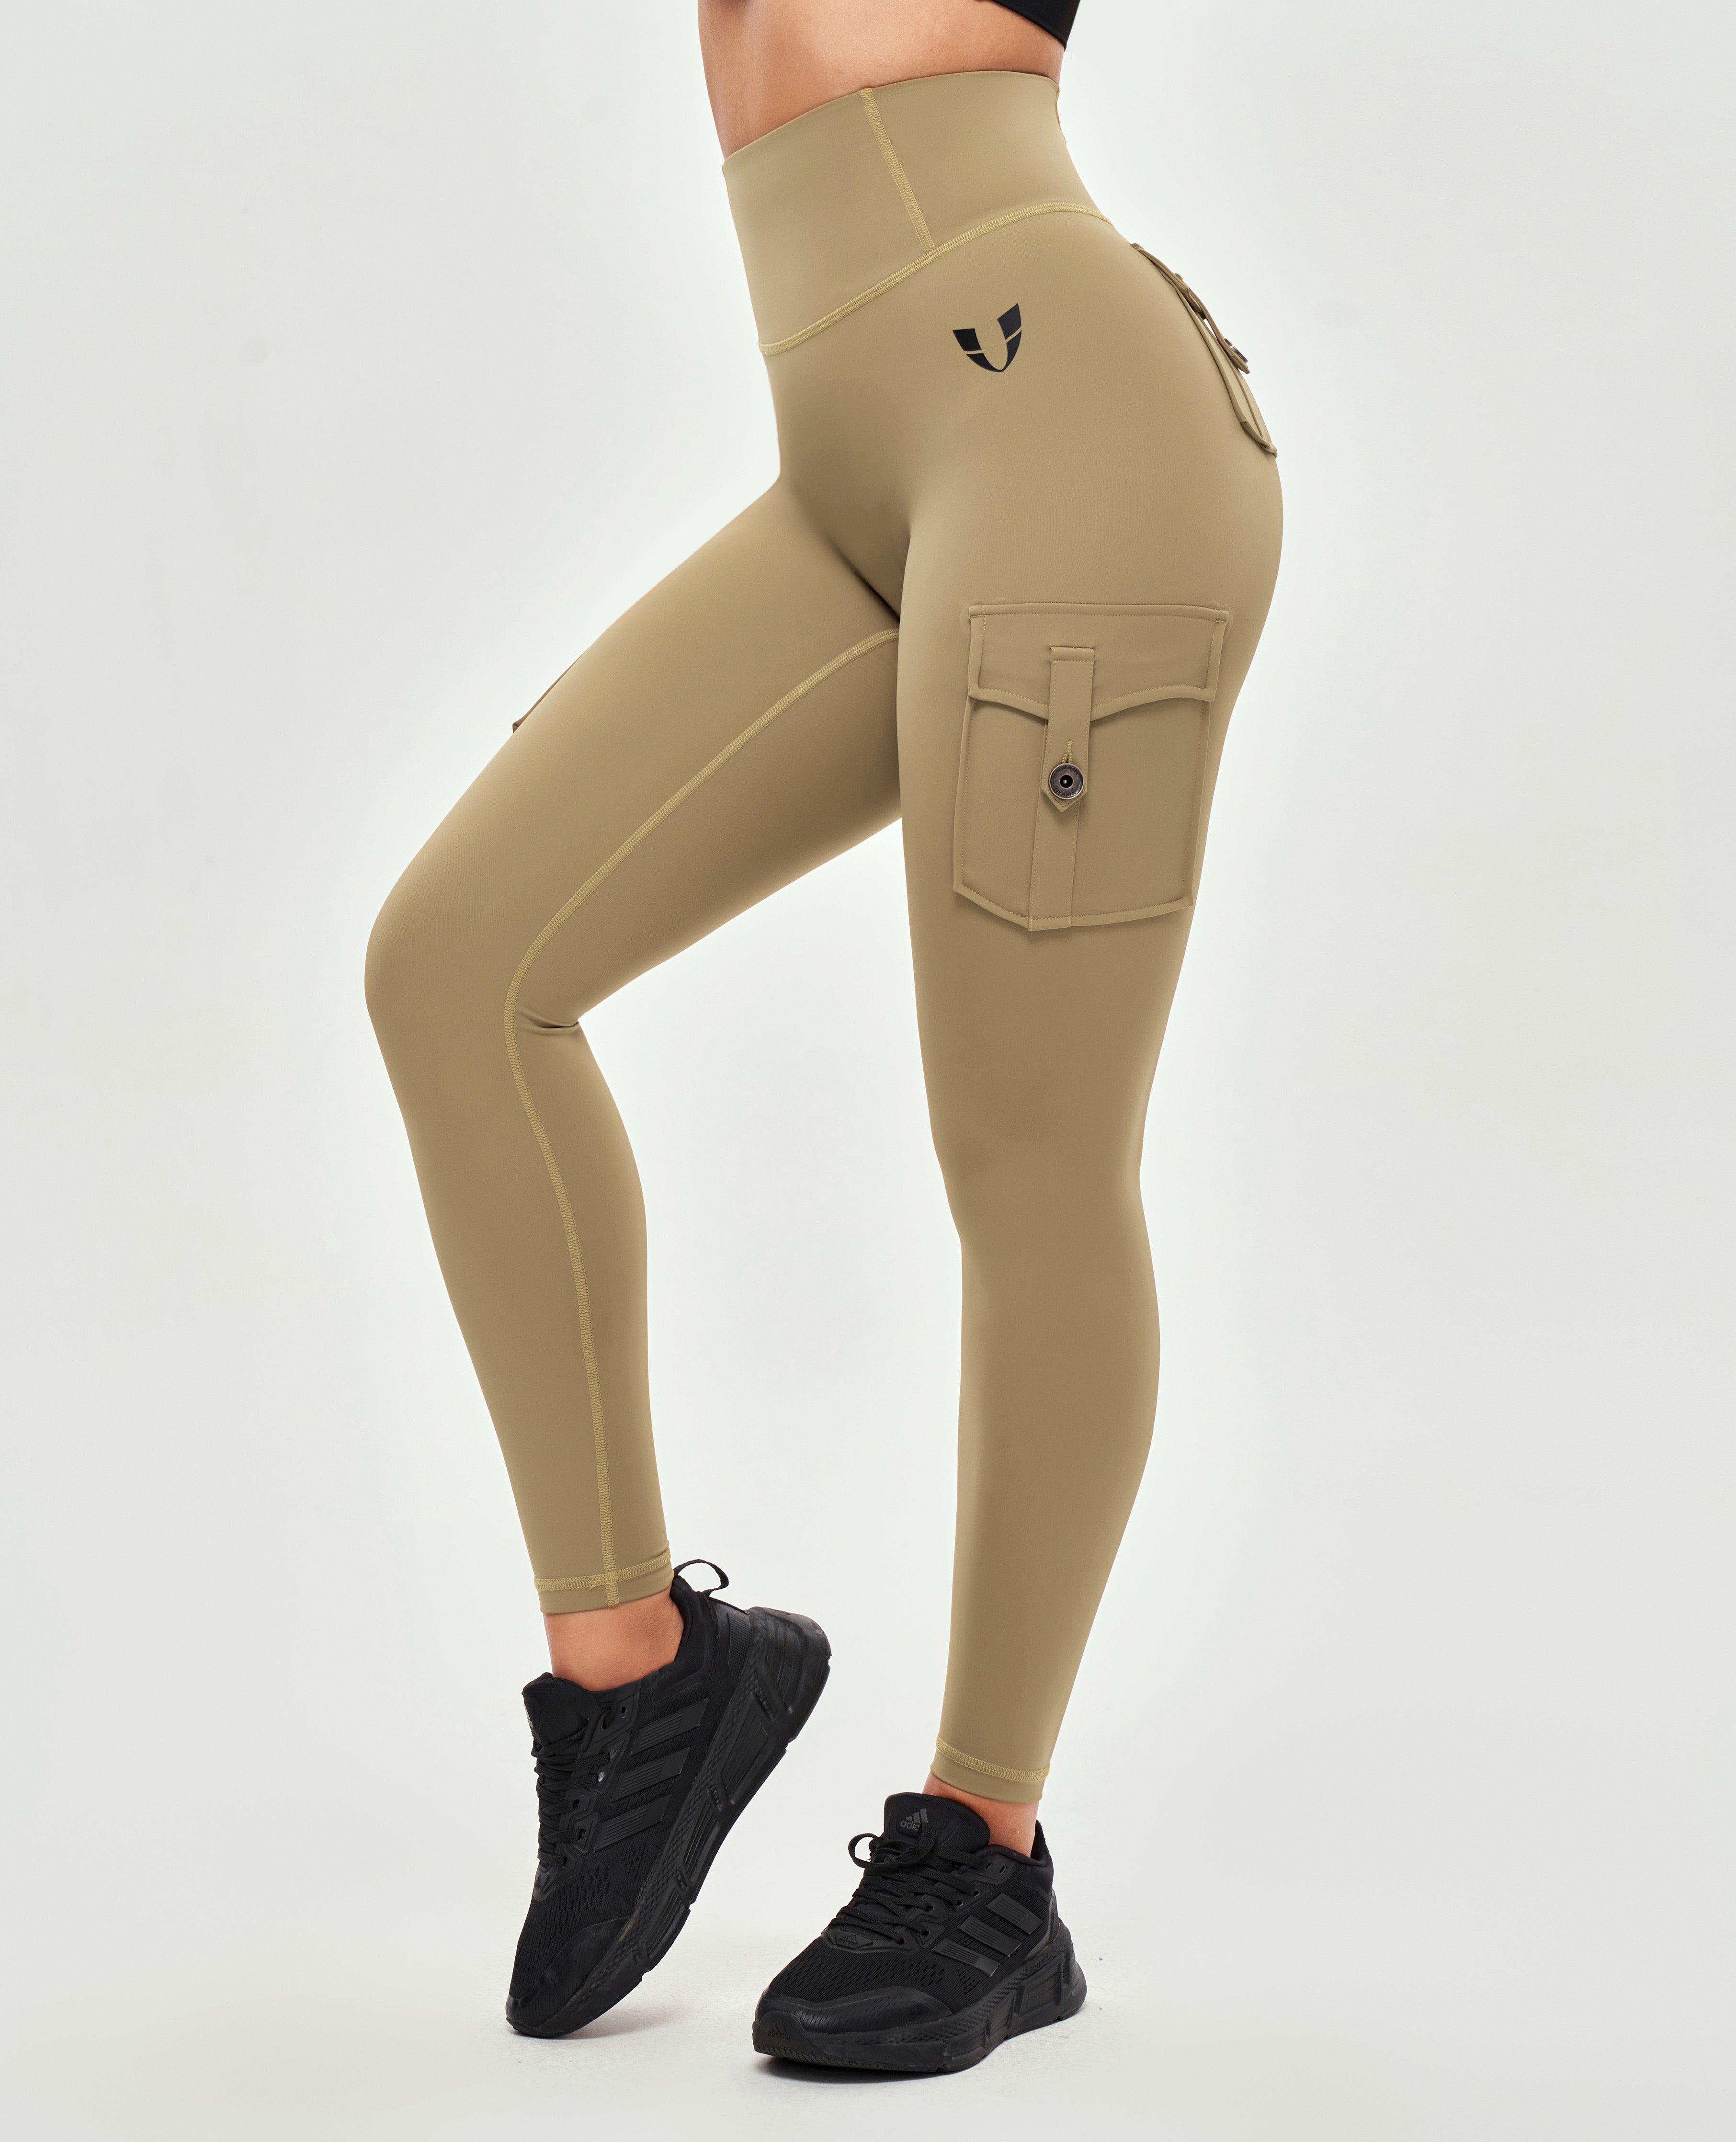 Women's Everyday Soft Ultra High-Rise Leggings - All in Motion Brown XL